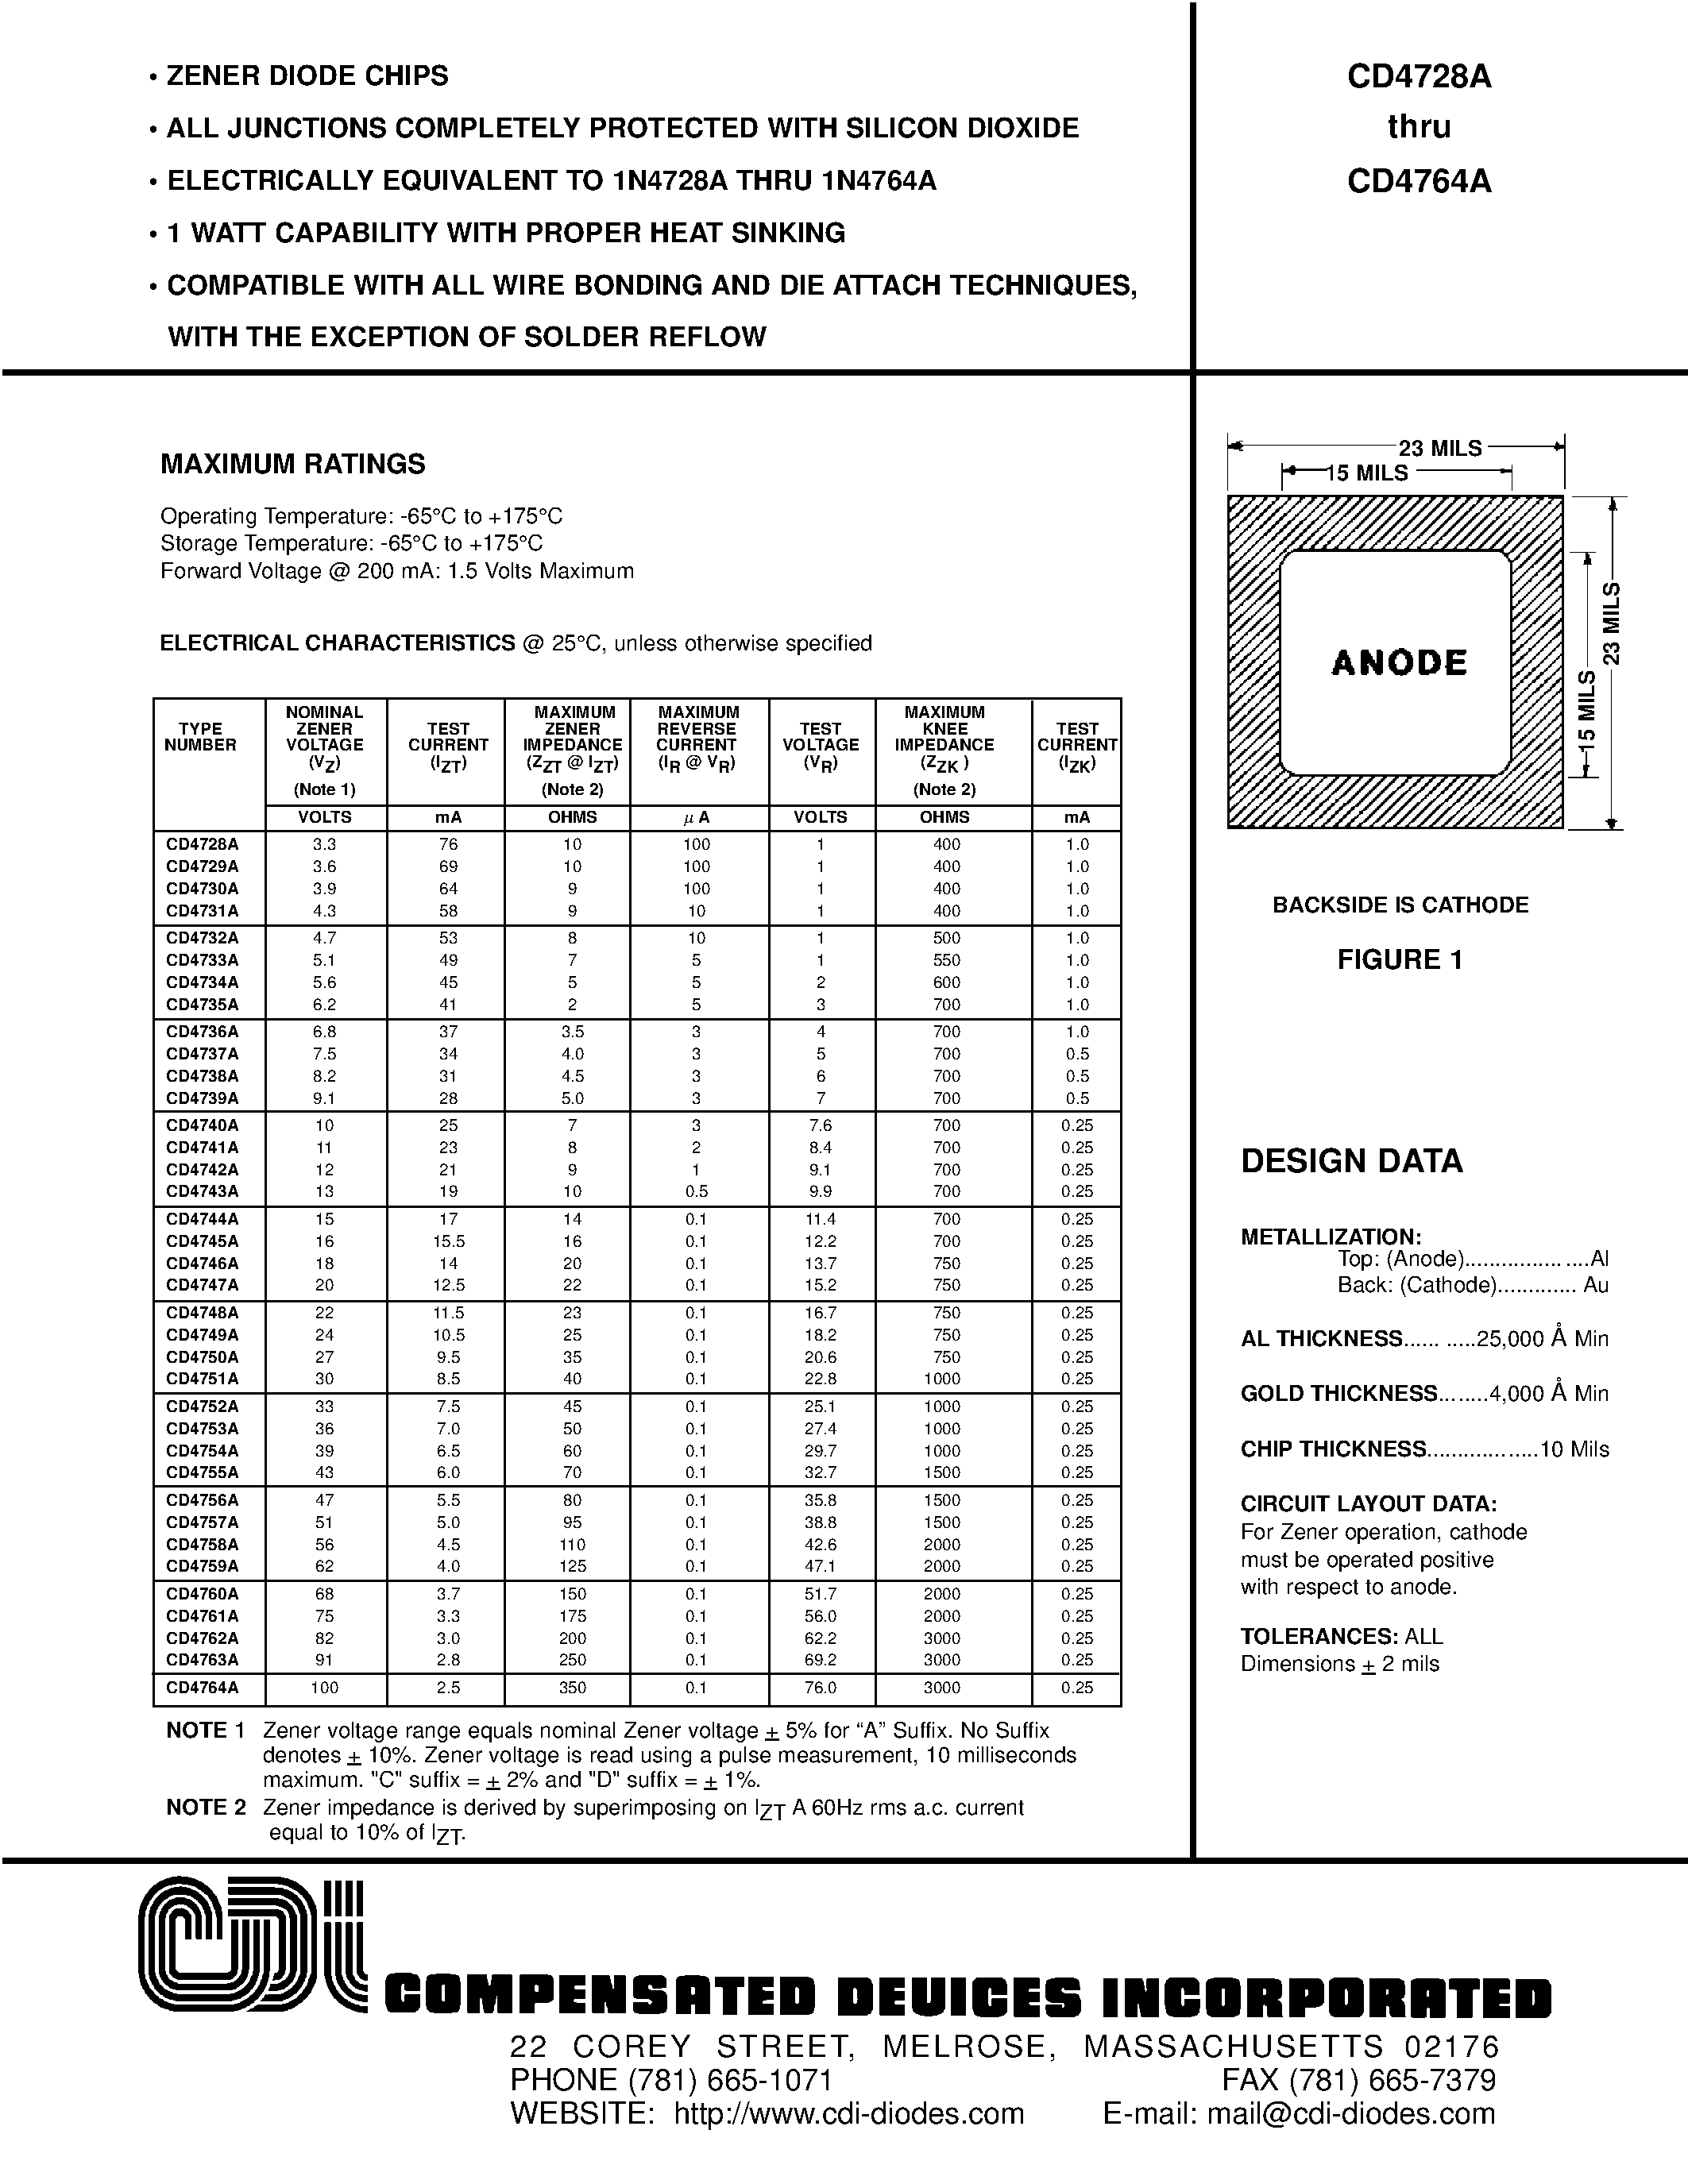 Datasheet CD4762A - ZENER DIODE CHIPS page 1